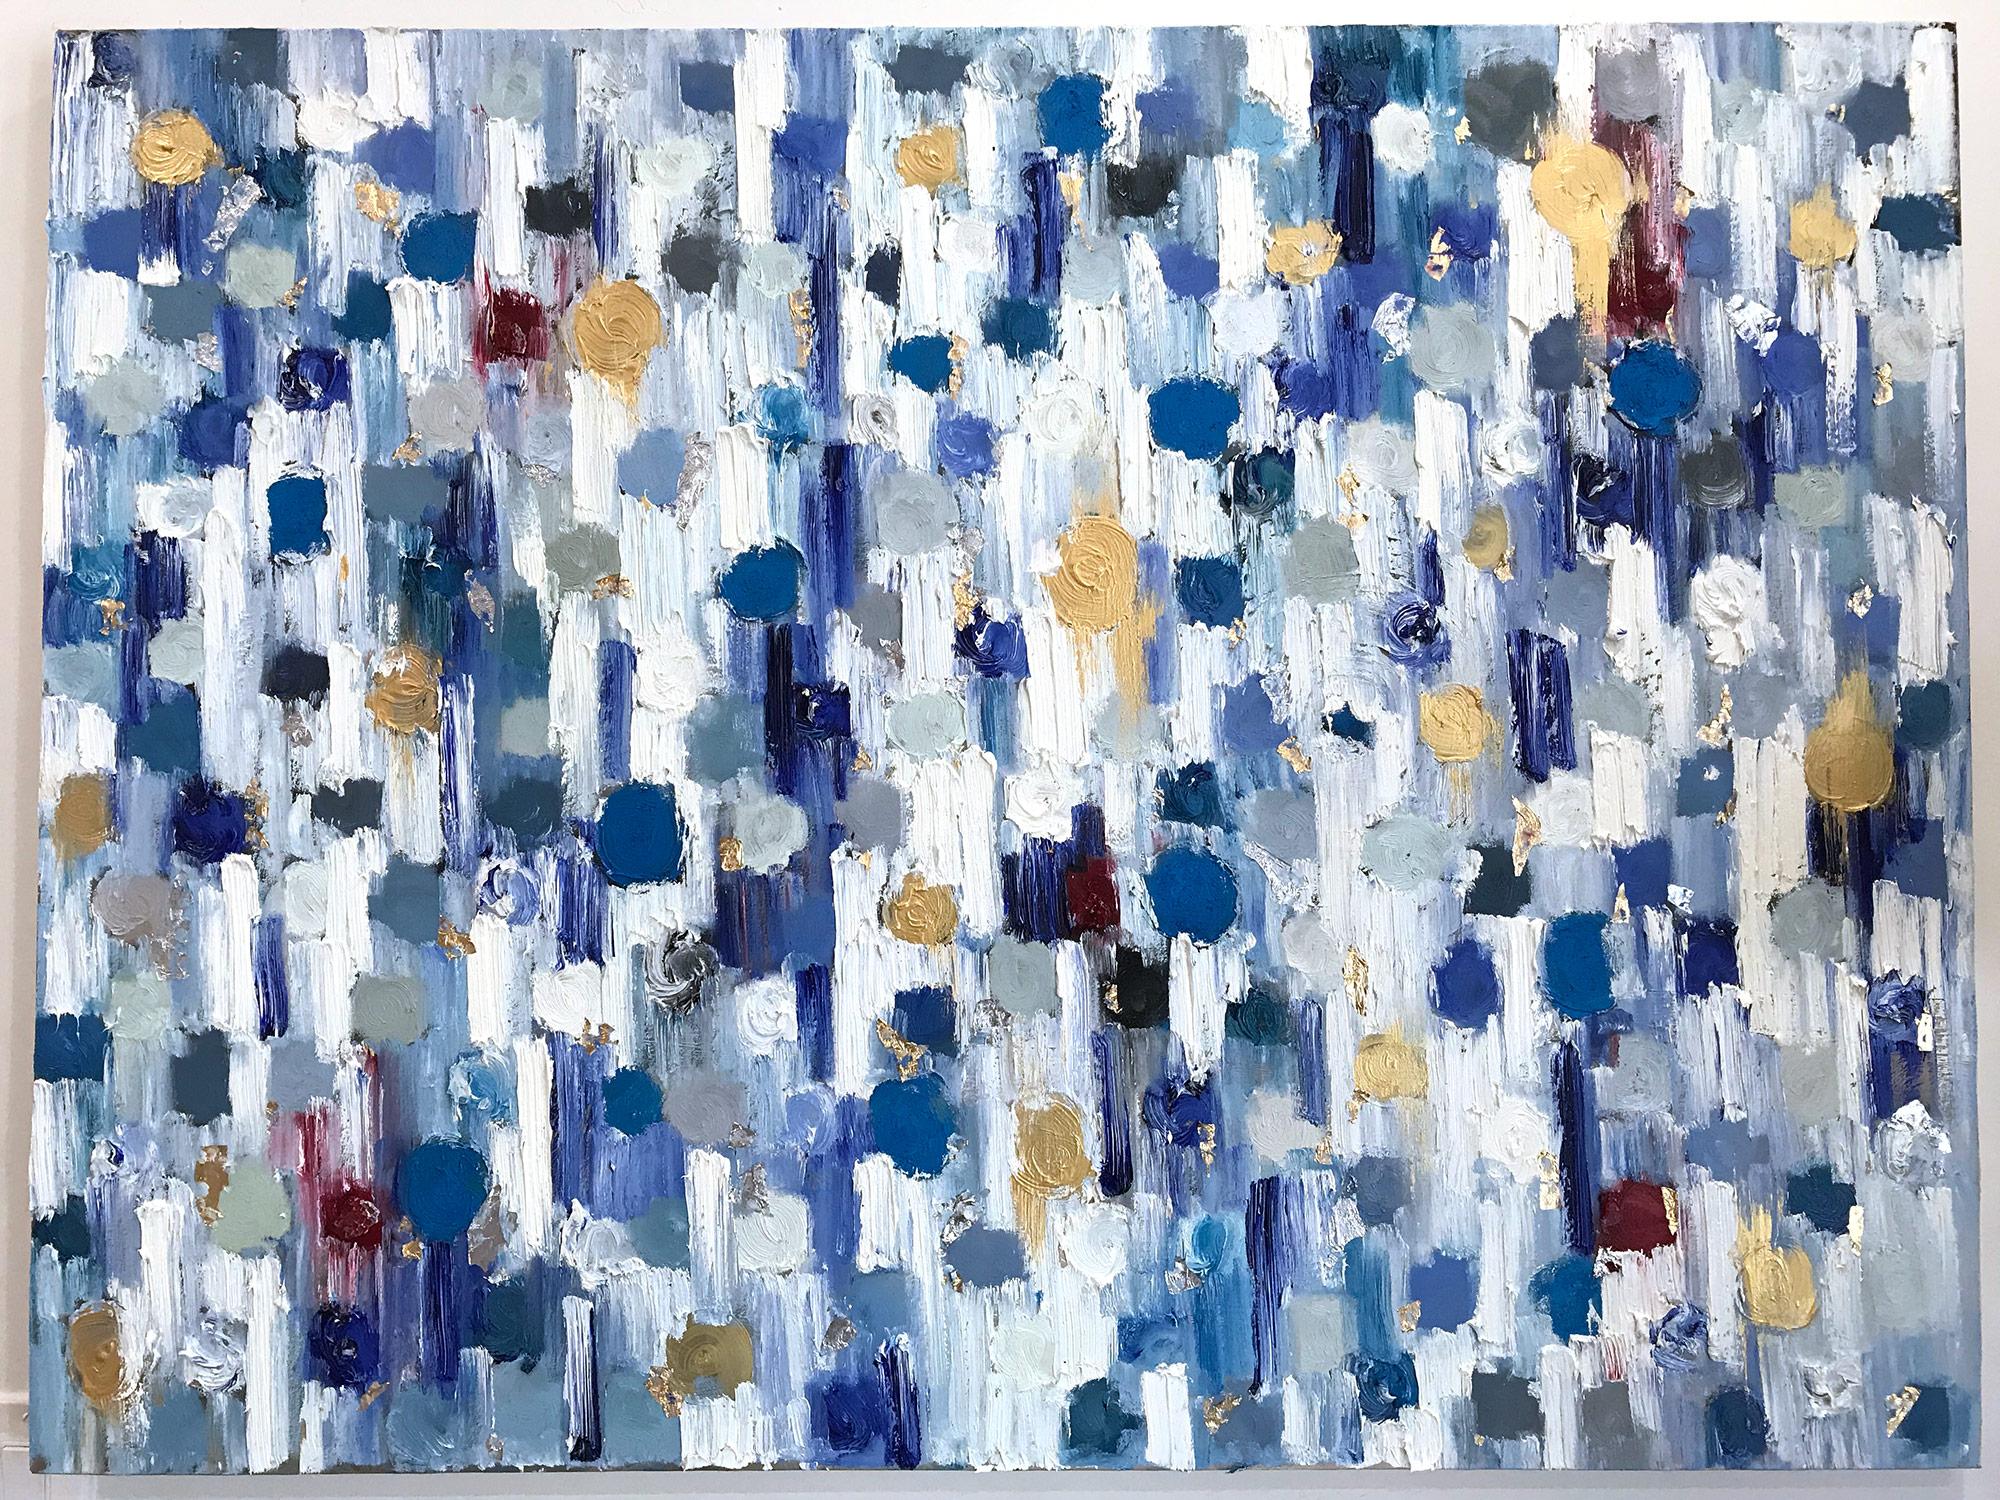 Dripping Dots, Aspen, Colorful, Abstract, Oil Painting - Blue Abstract Painting by Cindy Shaoul